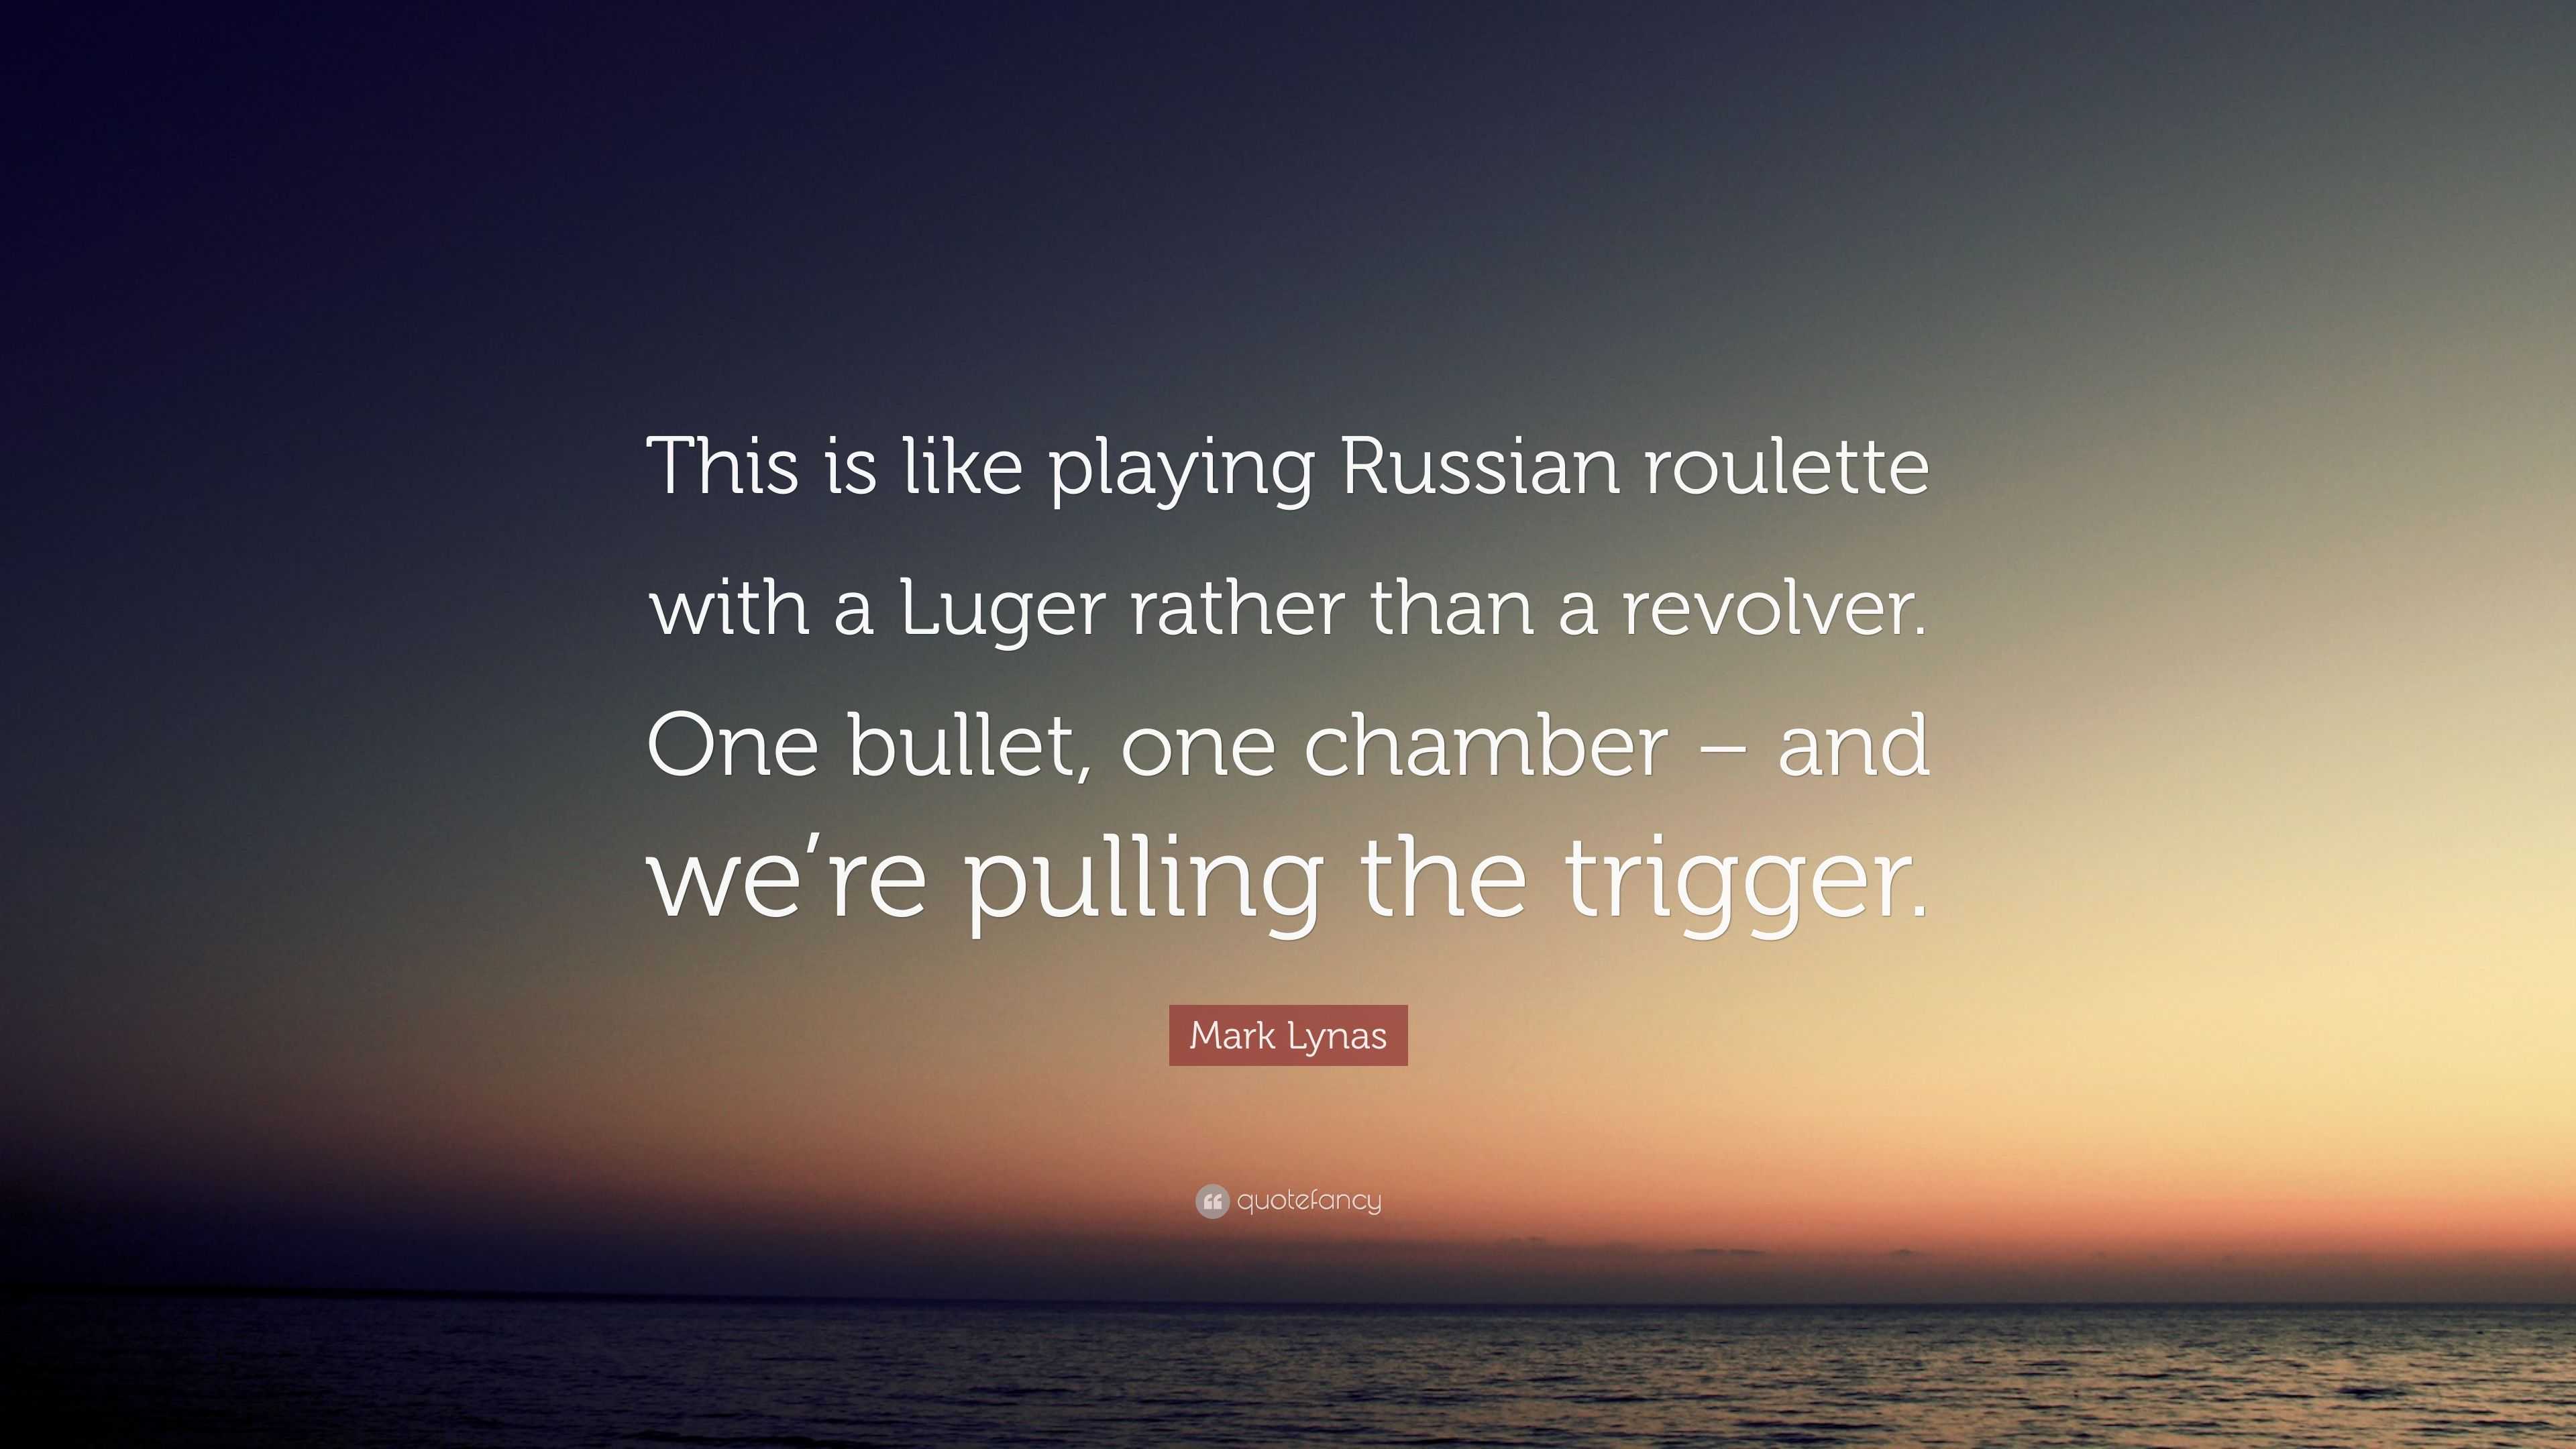 How about Russian Roulette, eh?”, by R.E.